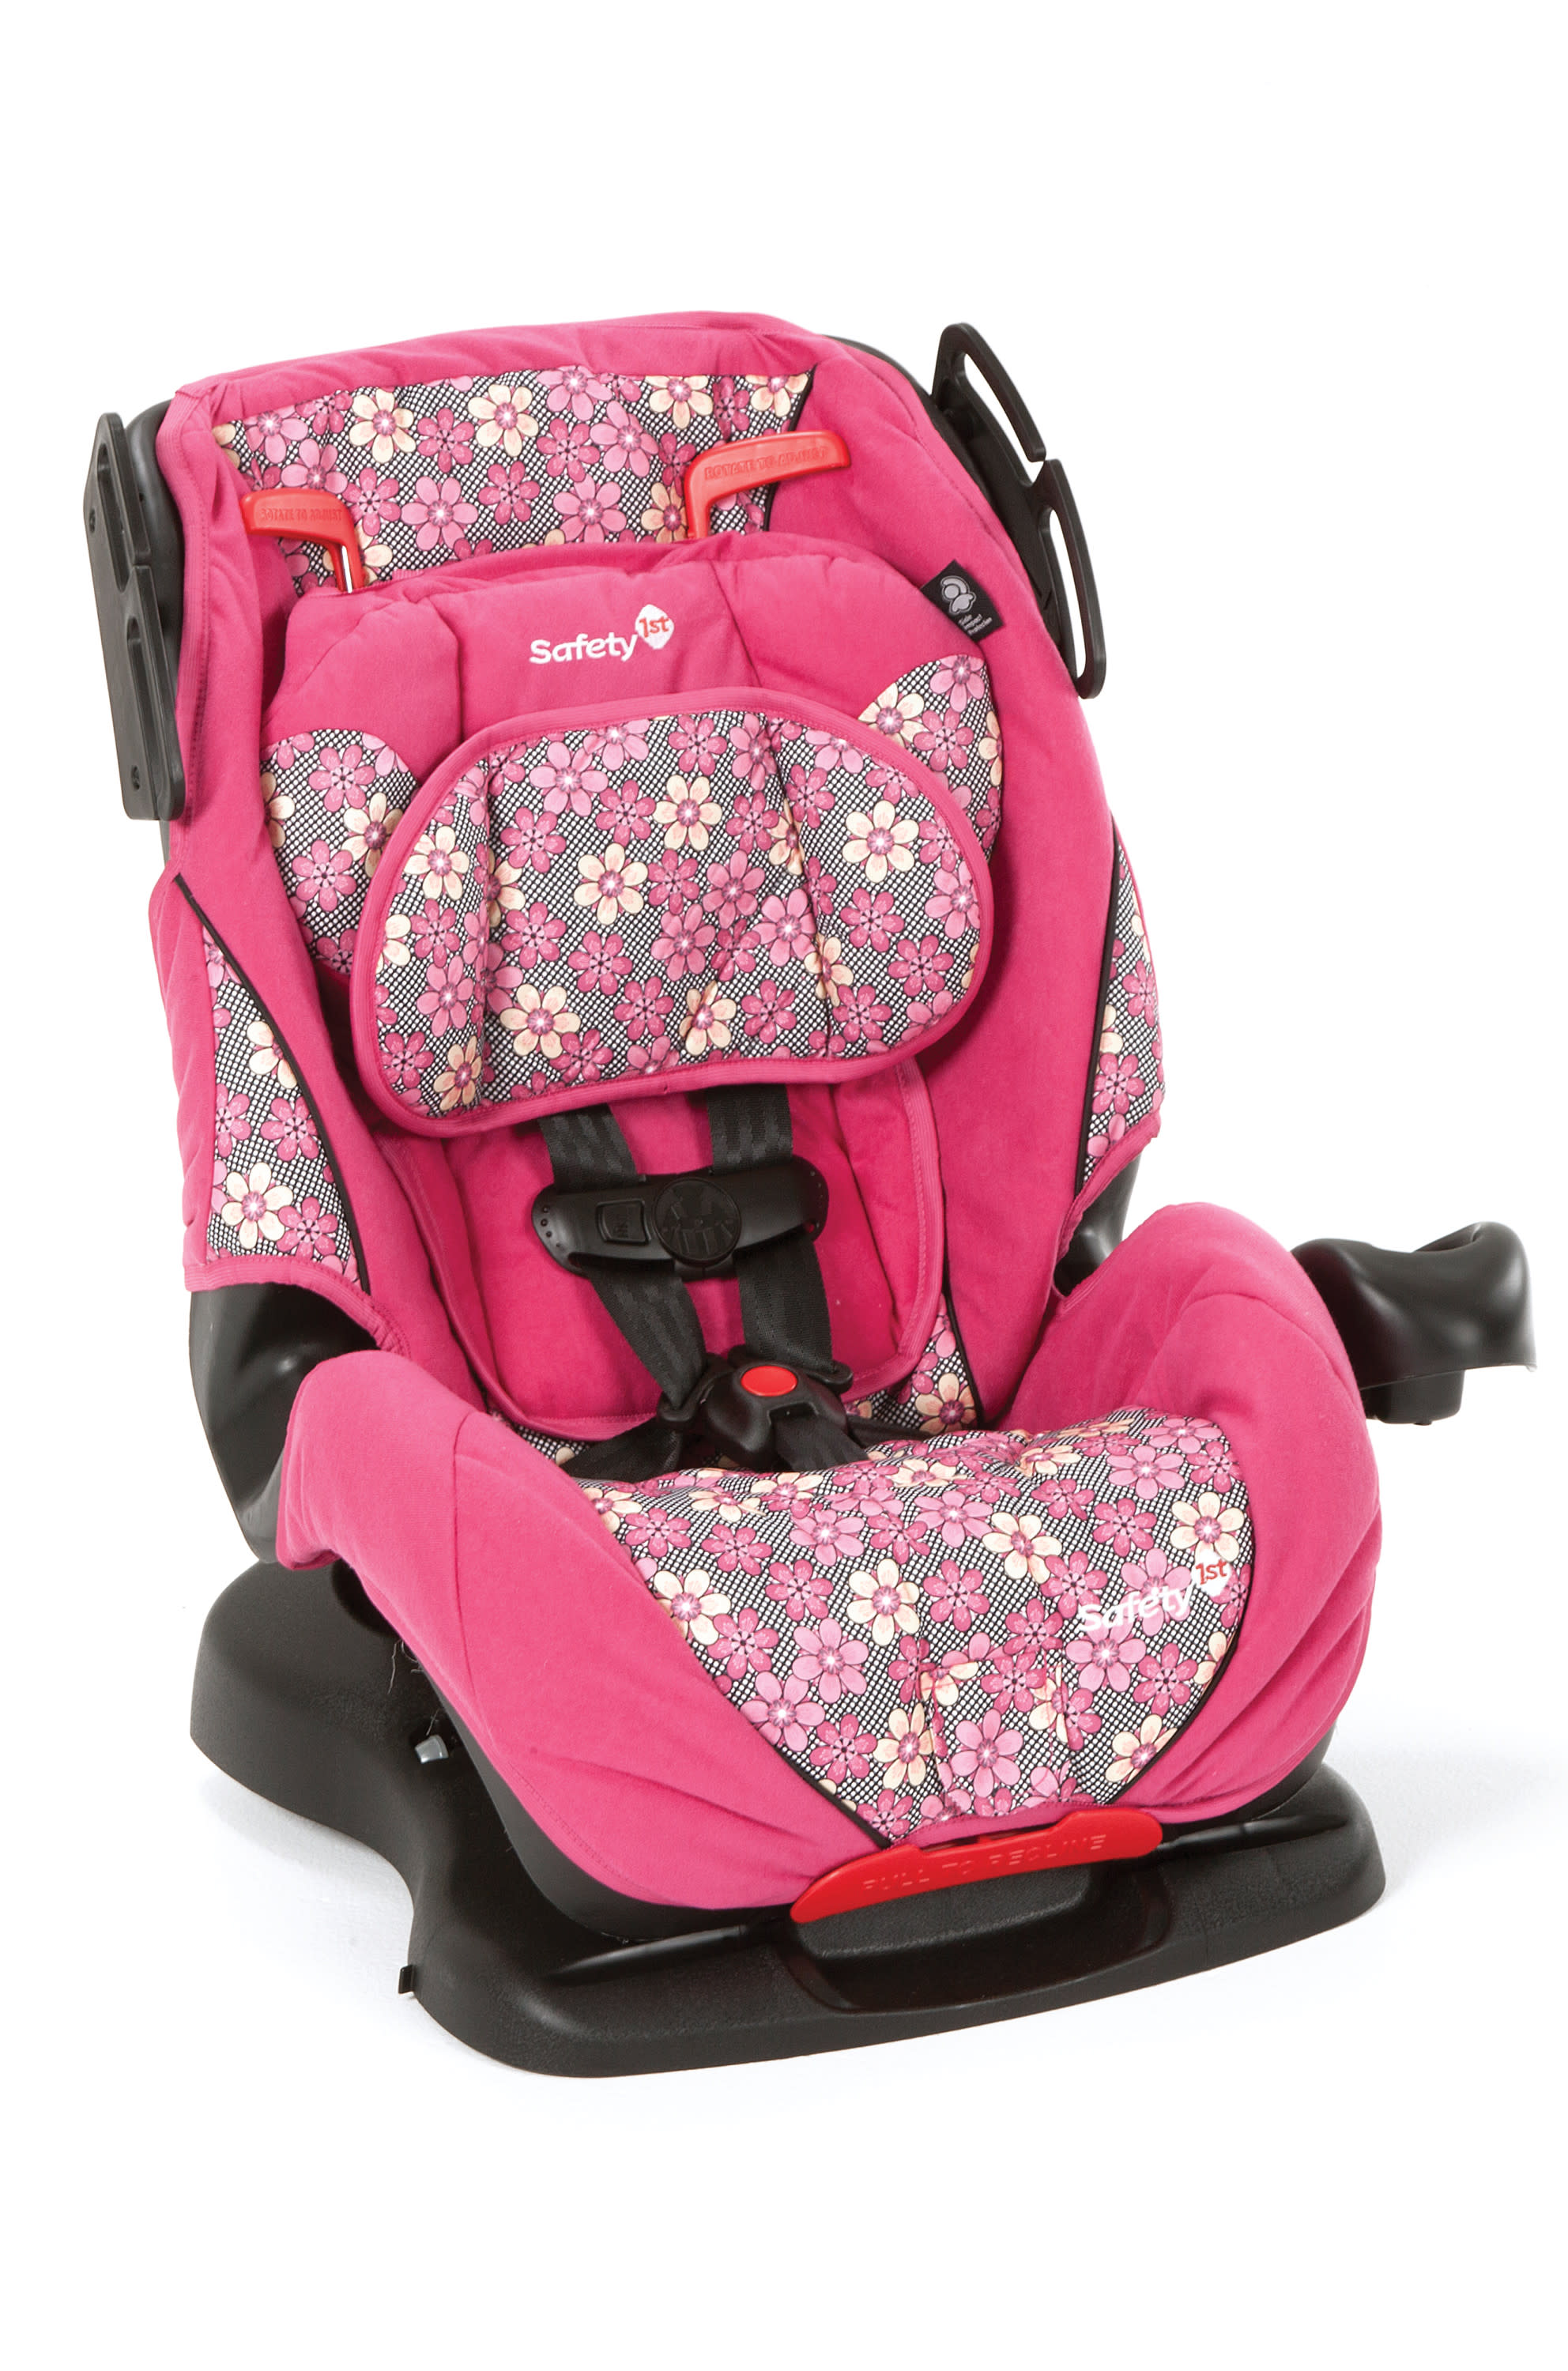 Safety 1ˢᵗ All-in-One Sport Convertible Car Seat, Giana - image 2 of 2